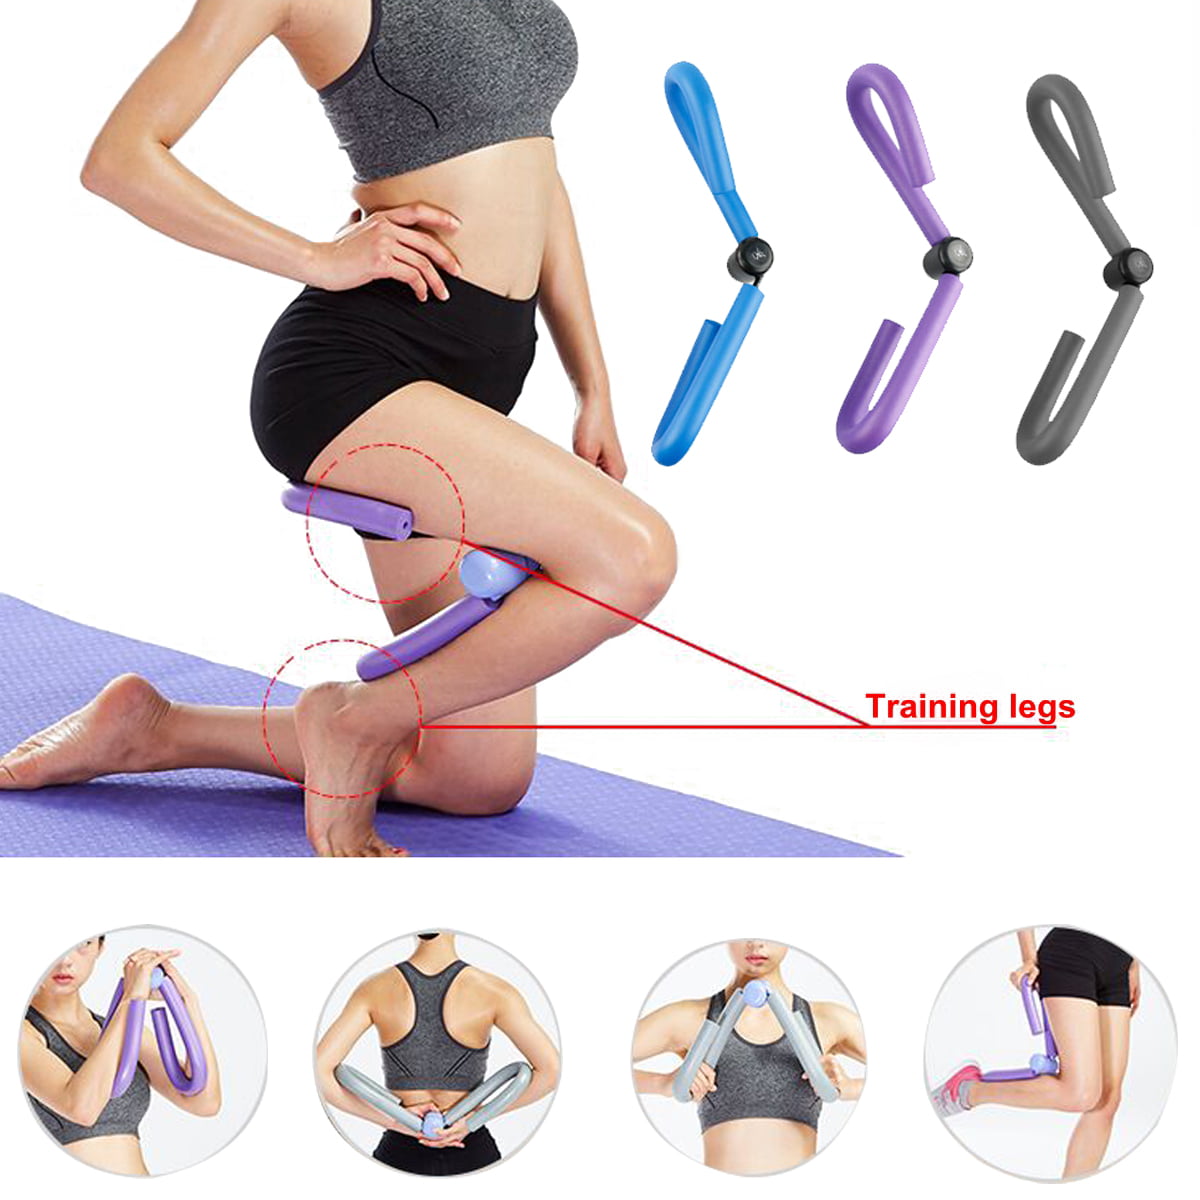 Gym Toner Thigh Master Leg Arm Muscle Fitness Exercise Thigh Exercisers Tool 